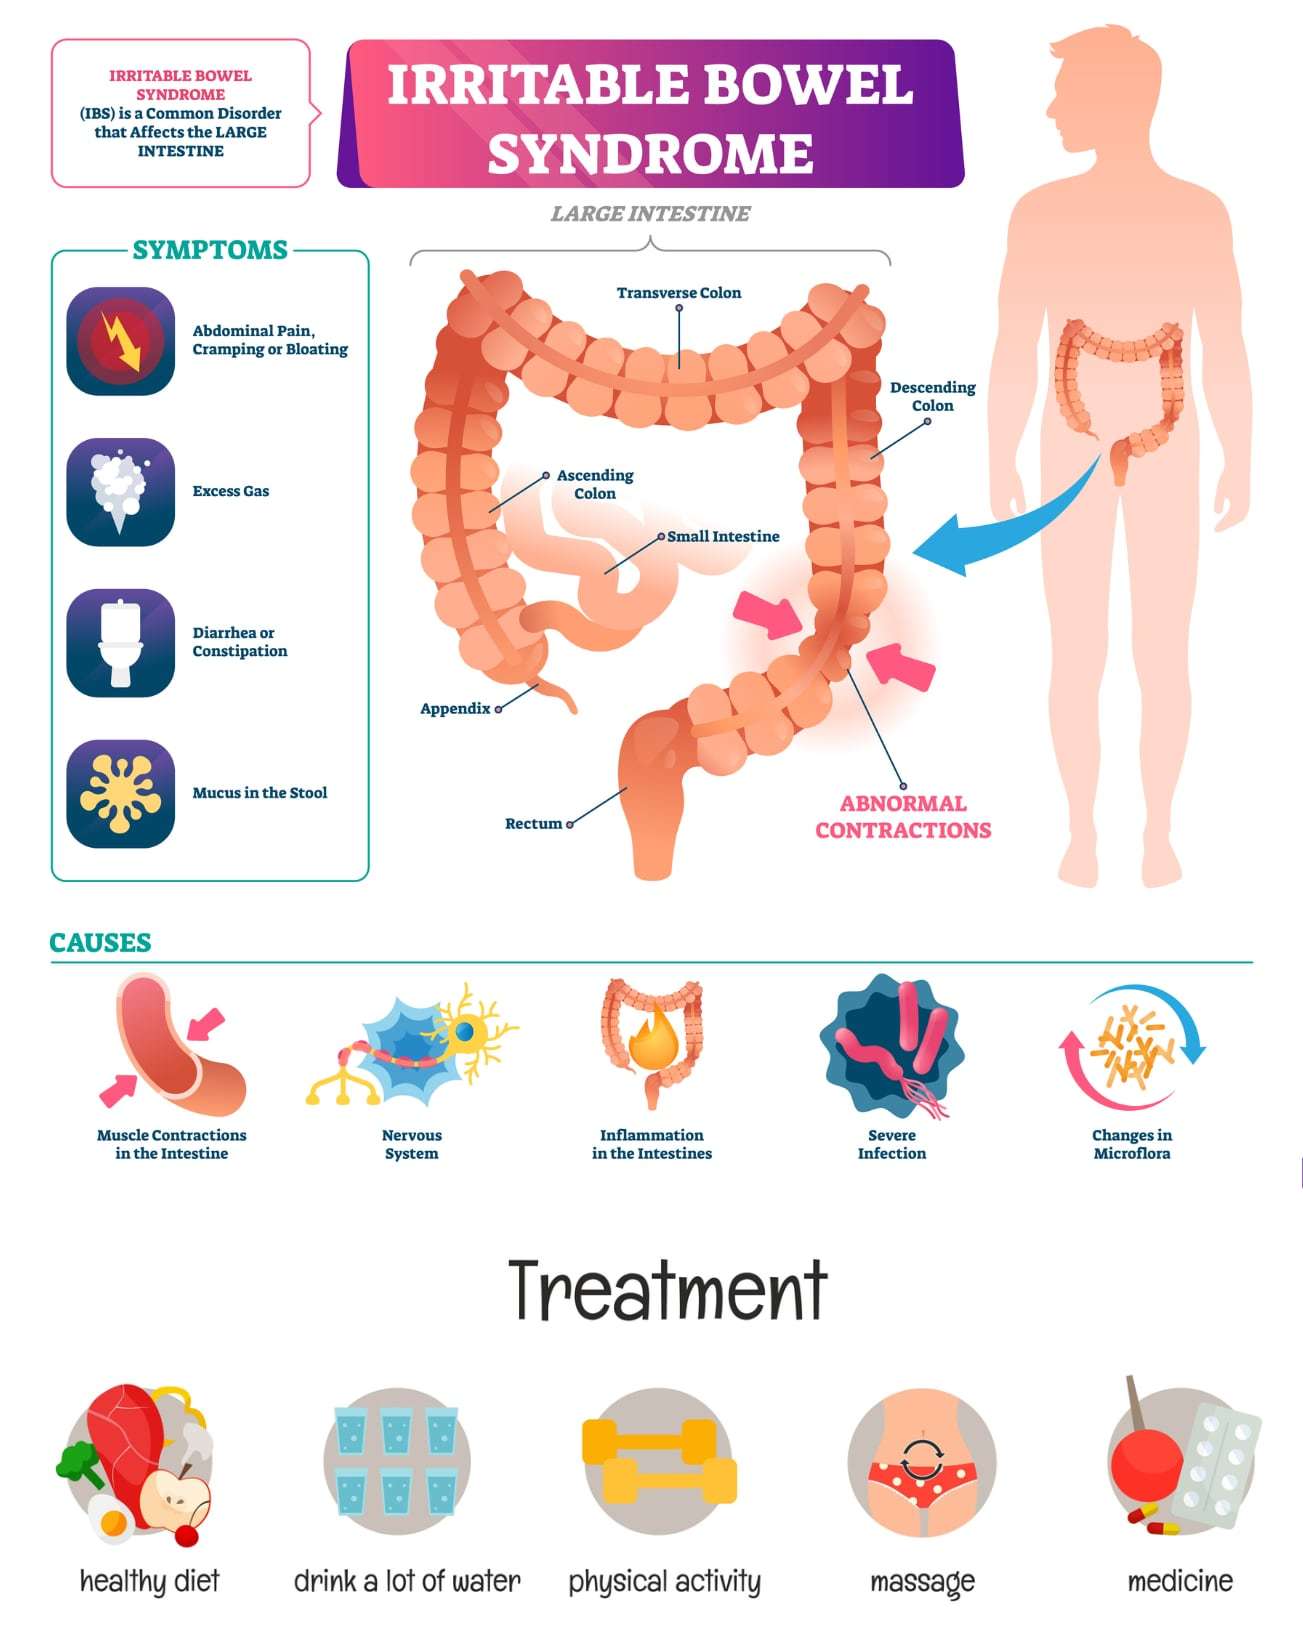 How Do You Know If You Have IBS-C (Irritable Bowel Syndrome with